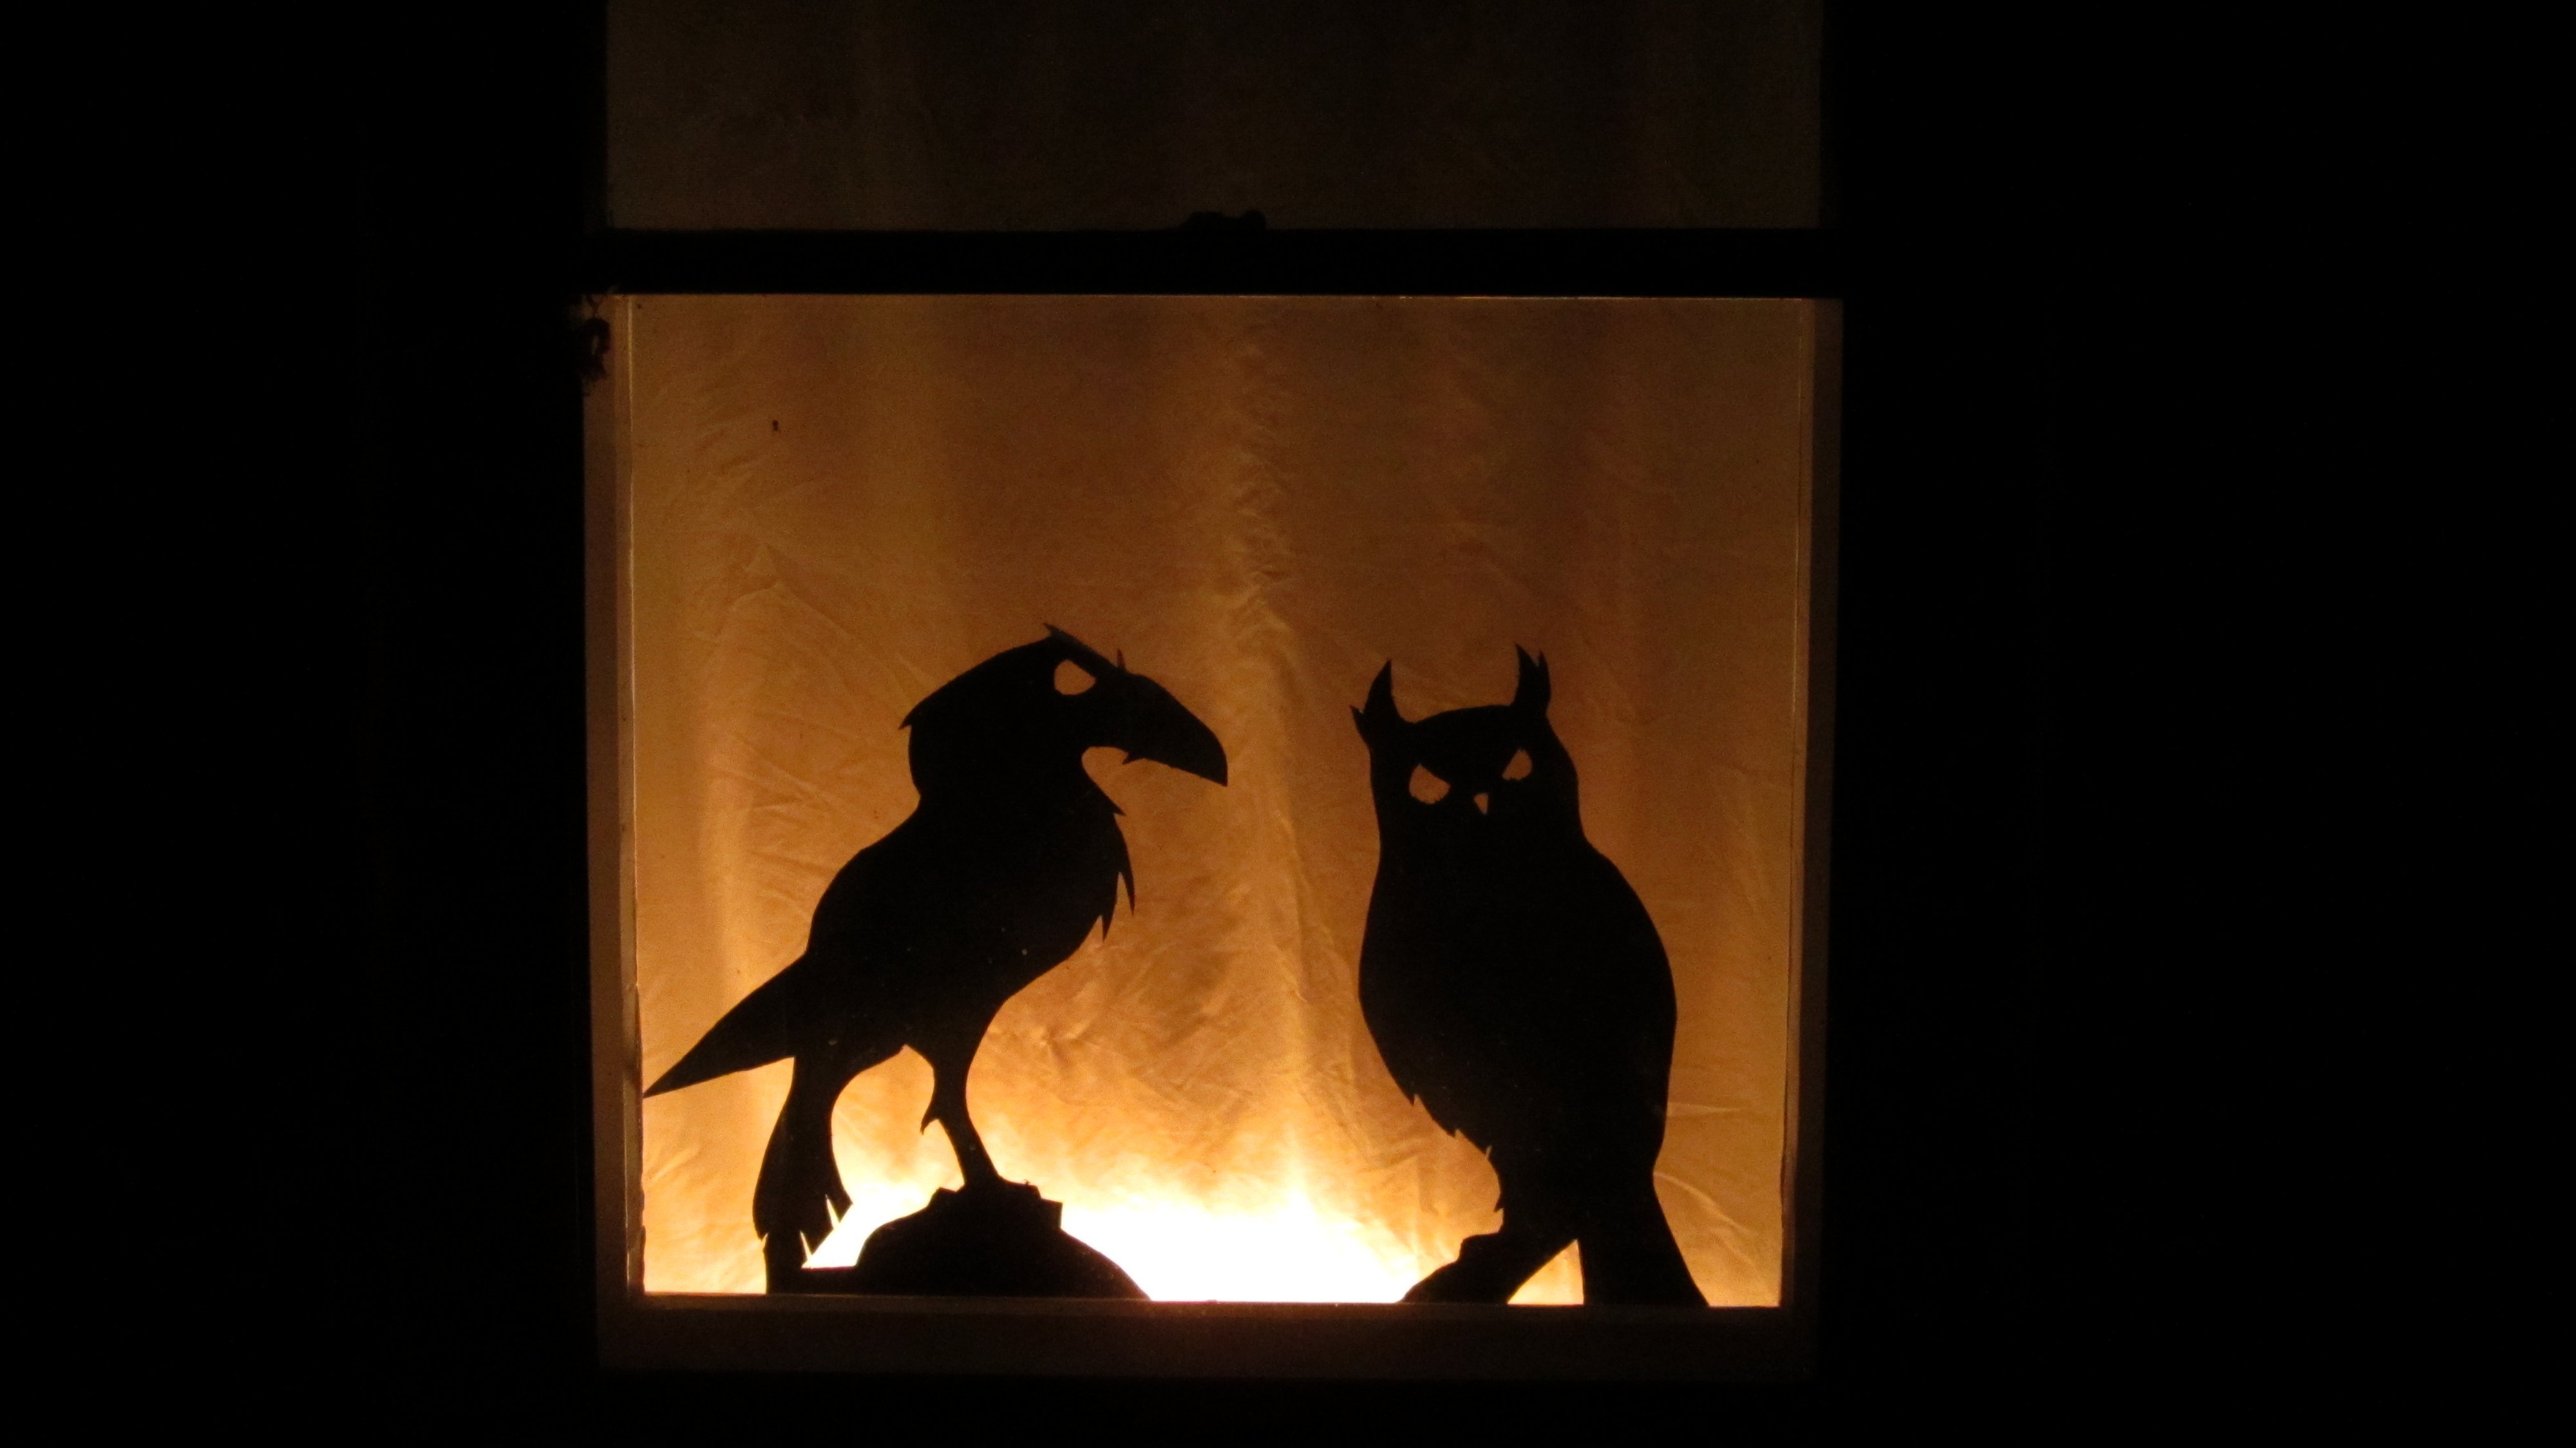 Spooky Window Silhouettes With Follow-Me Eyes